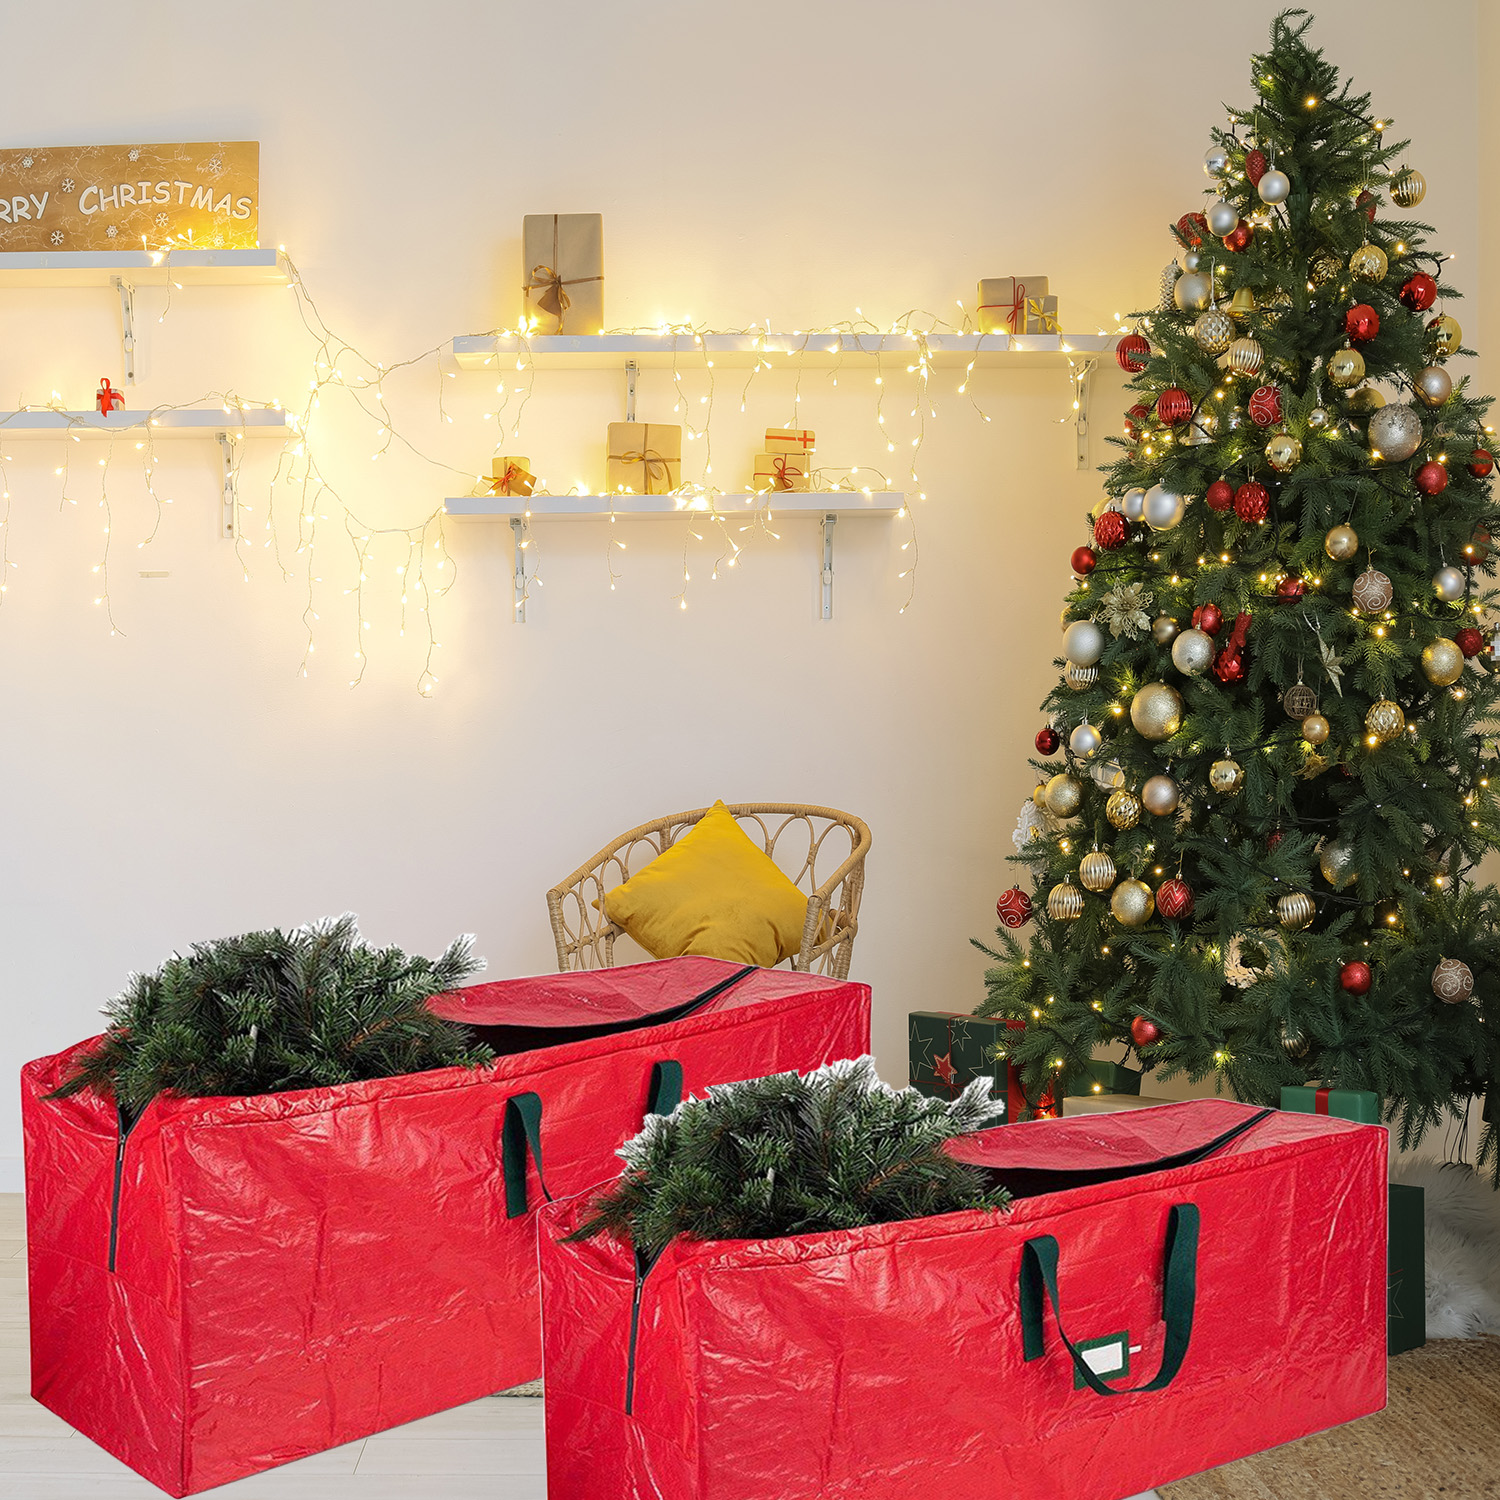 Wholesale Christmas Tree Storage Bag Dust Proof Cover Protect Waterproof Large Capacity Bag Garland Storage Bag Holiday Supplies Organizer